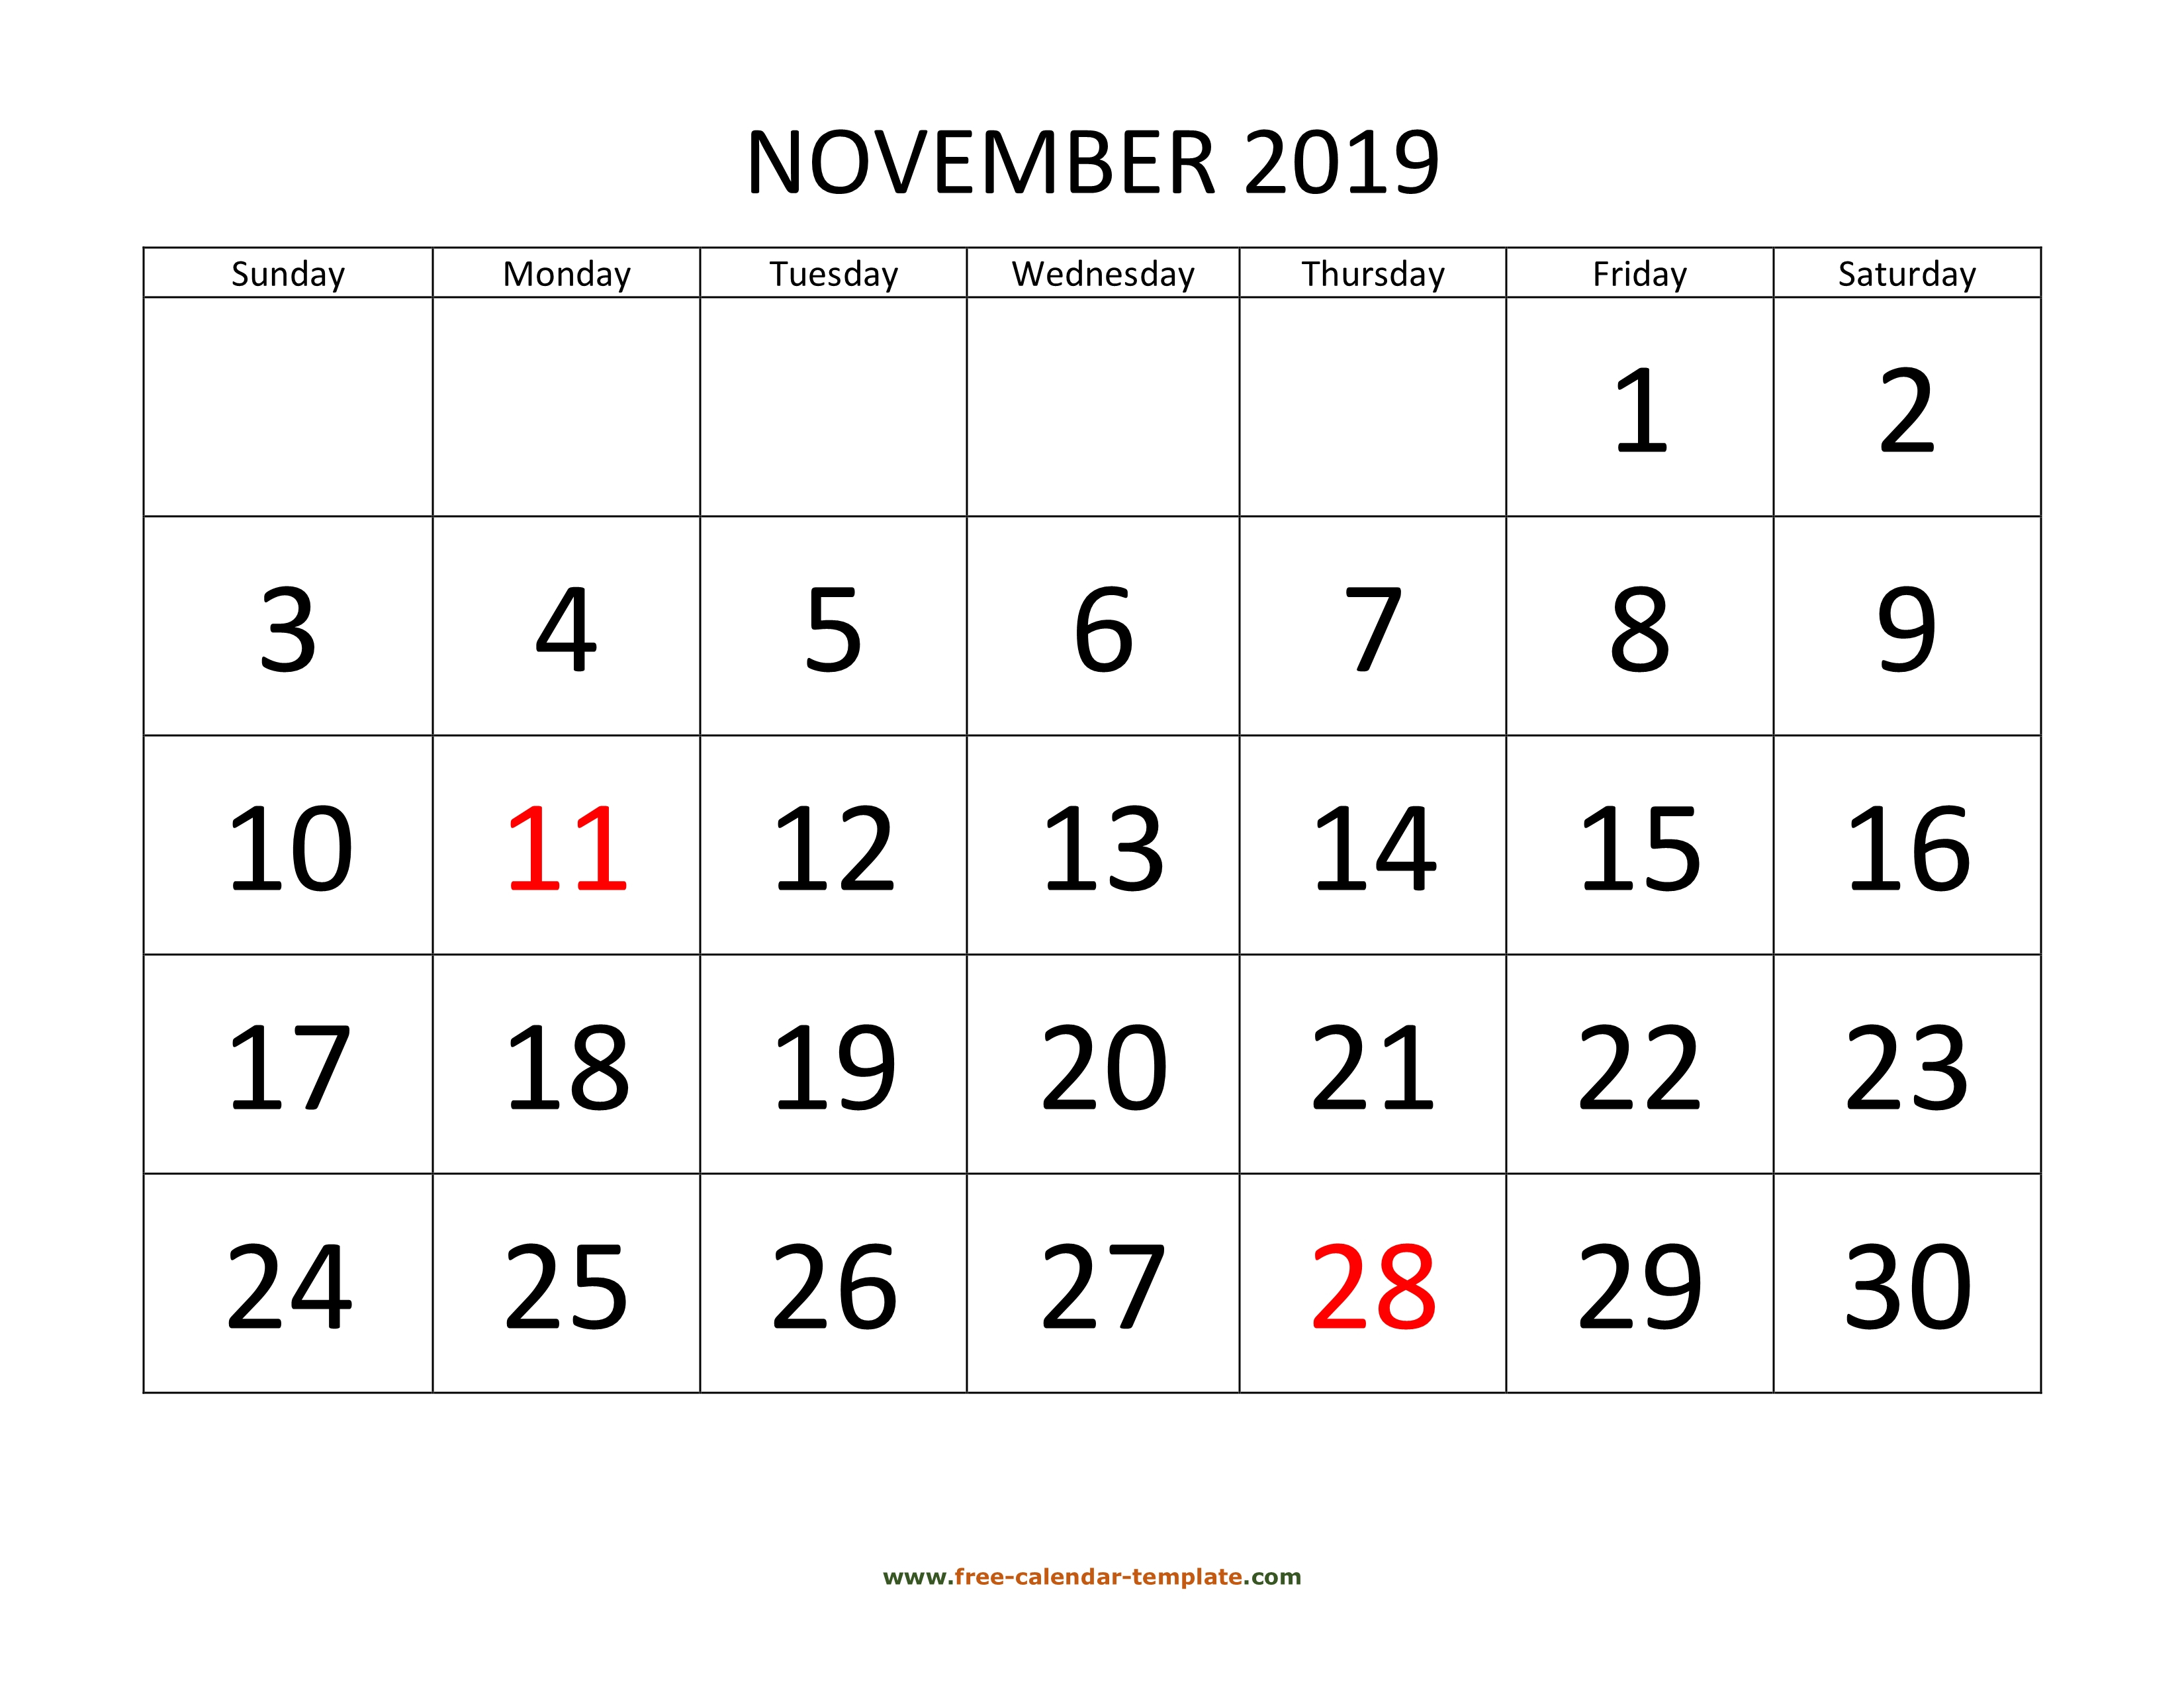 November 2019 Free Calendar Tempplate | Freecalendar with Free Monthly Calendars That Can Be Edited